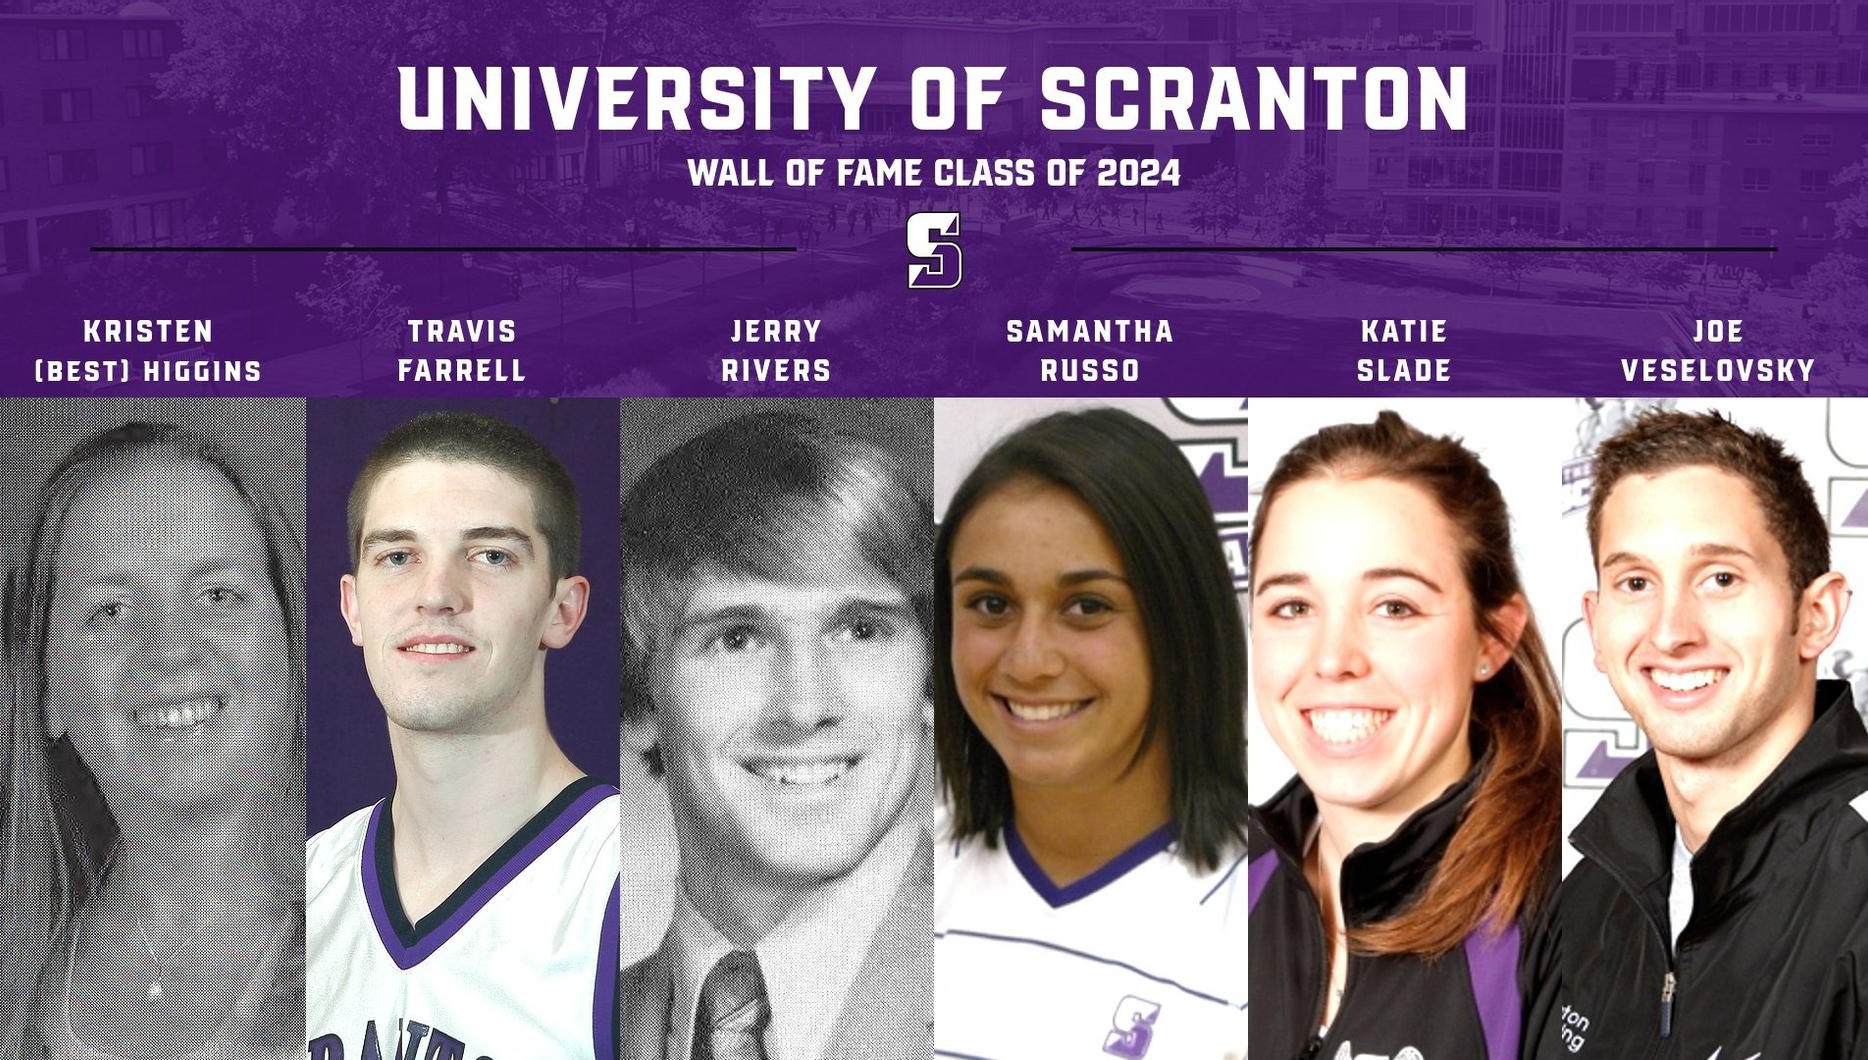 University To Induct Wall of Fame Class of 2024 Feb. 3 image